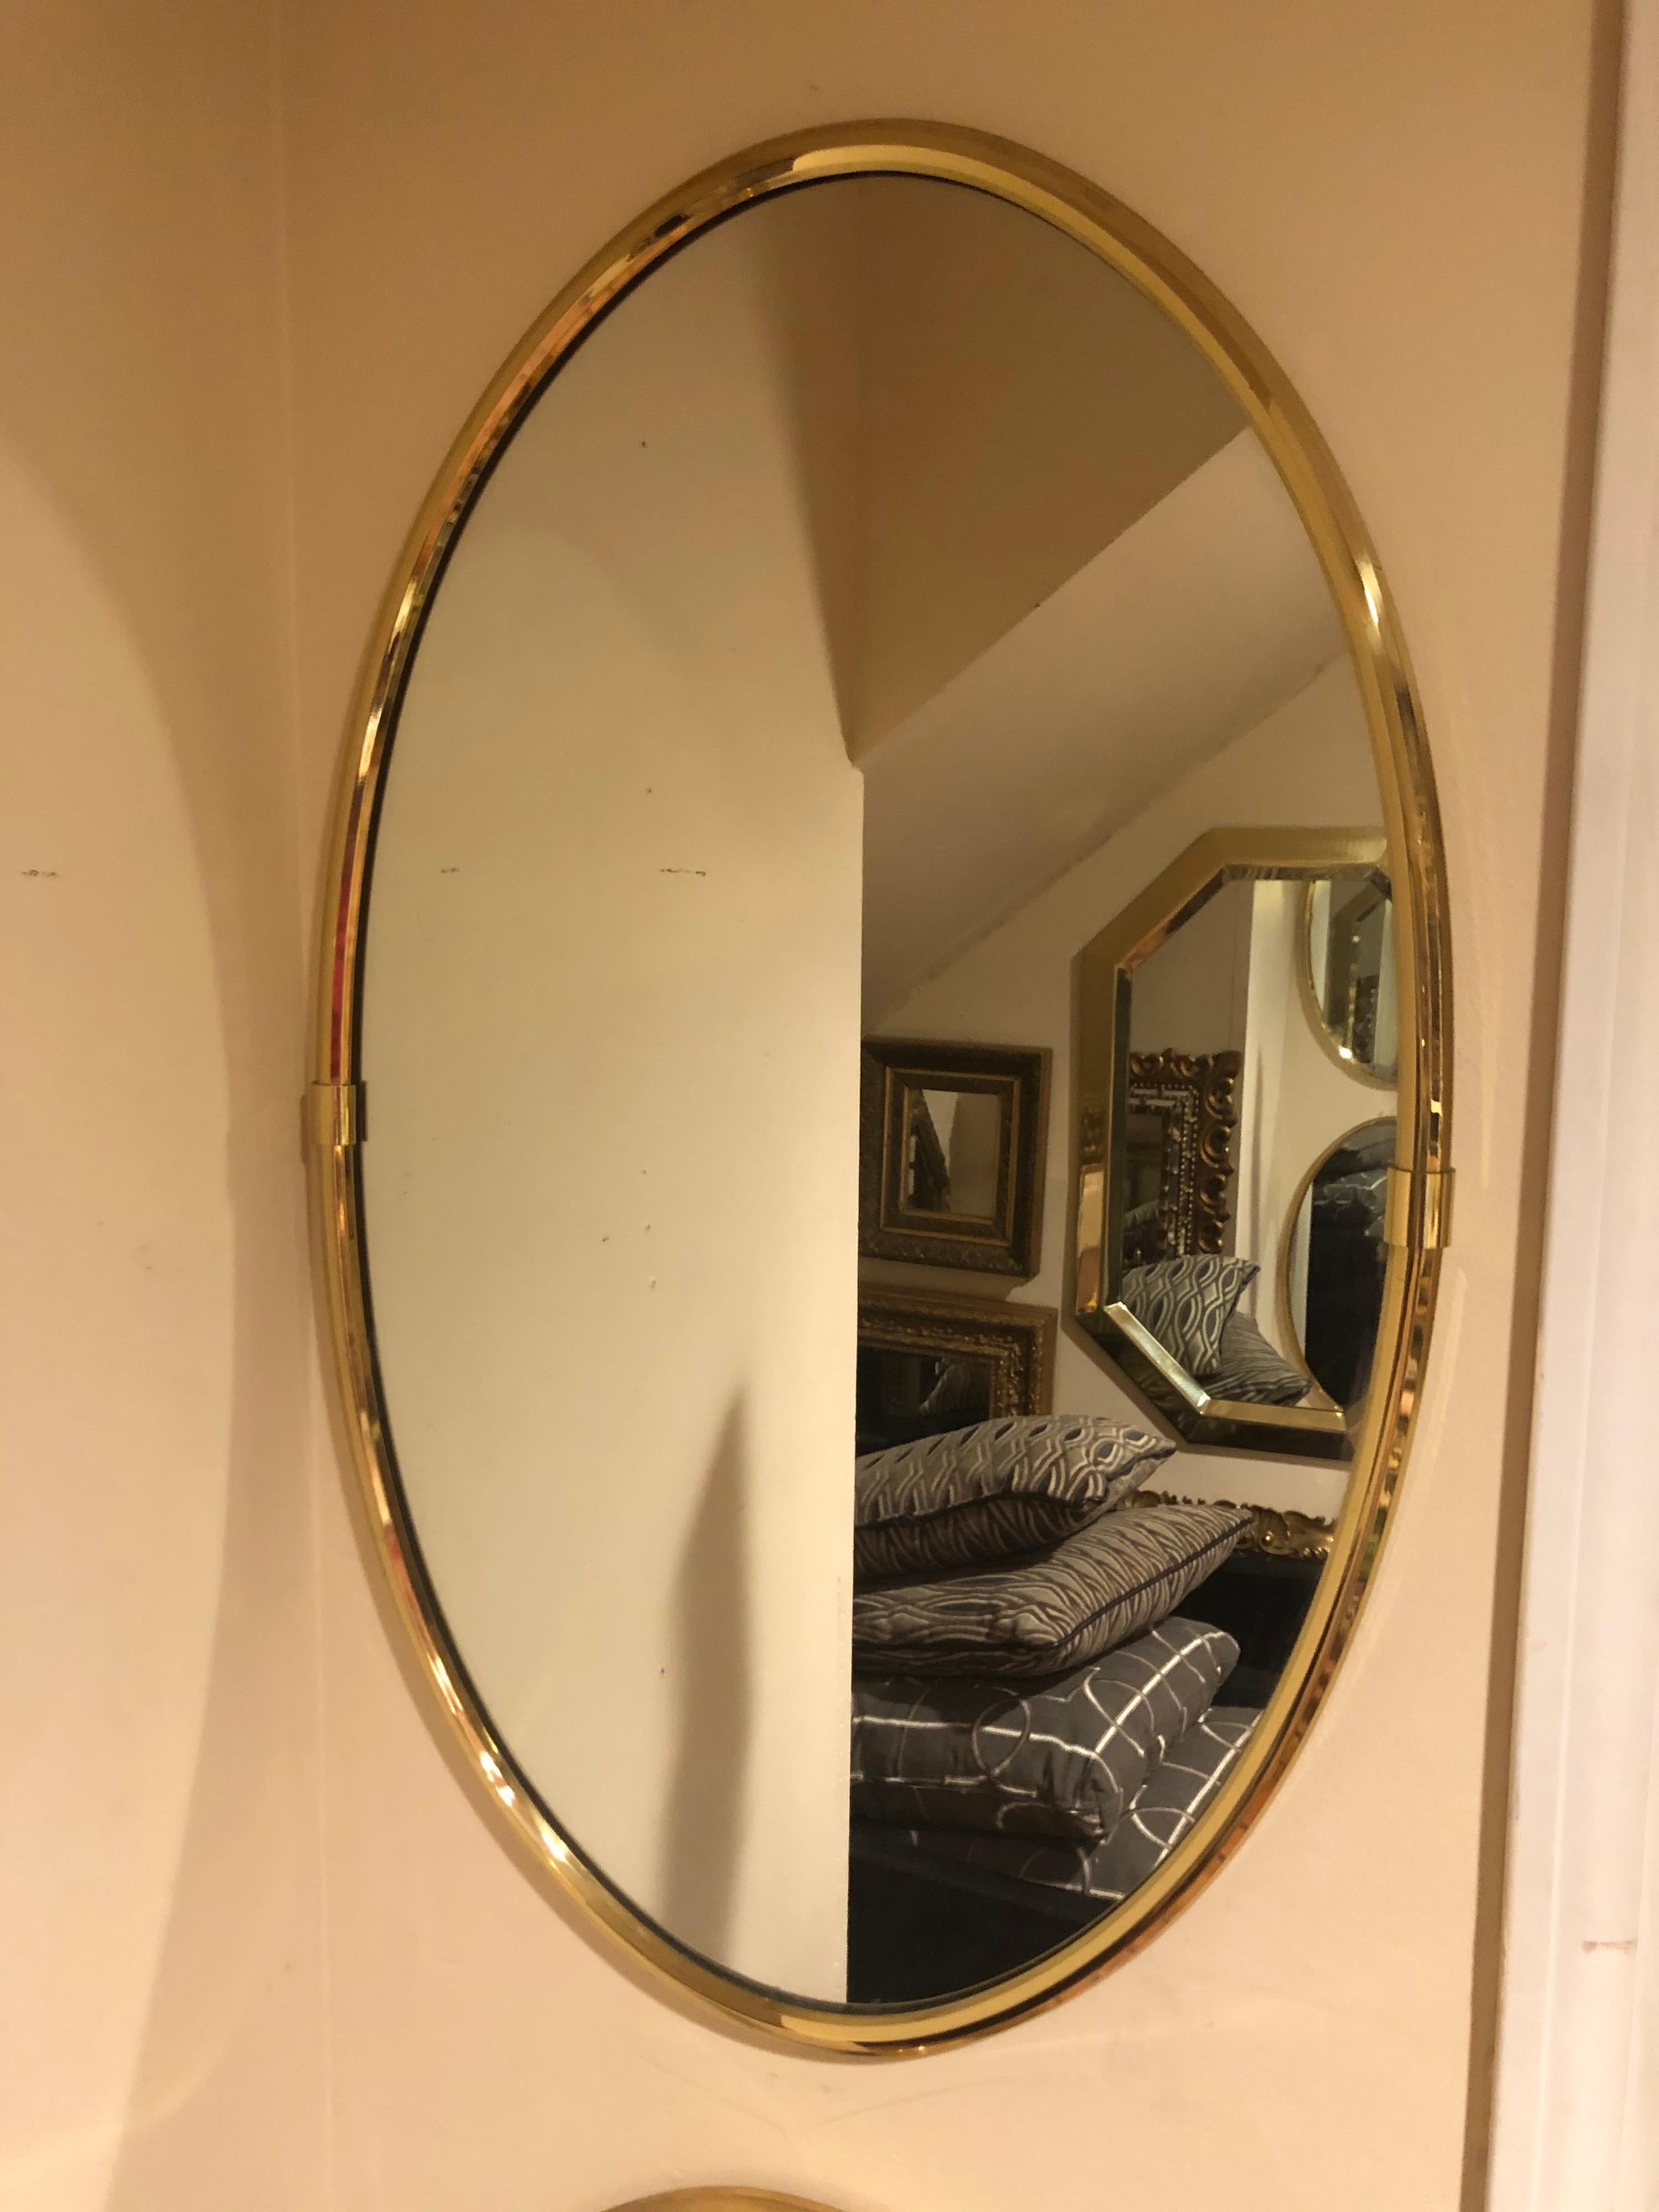 Hollywood Regency brass oval mirror. Most likely Italian. Banded, beveled edge to the brass frame. Simple, elegent lines with a small band in the middle on either side. The mirror is the top one of the two. They are both the same size. Only this one